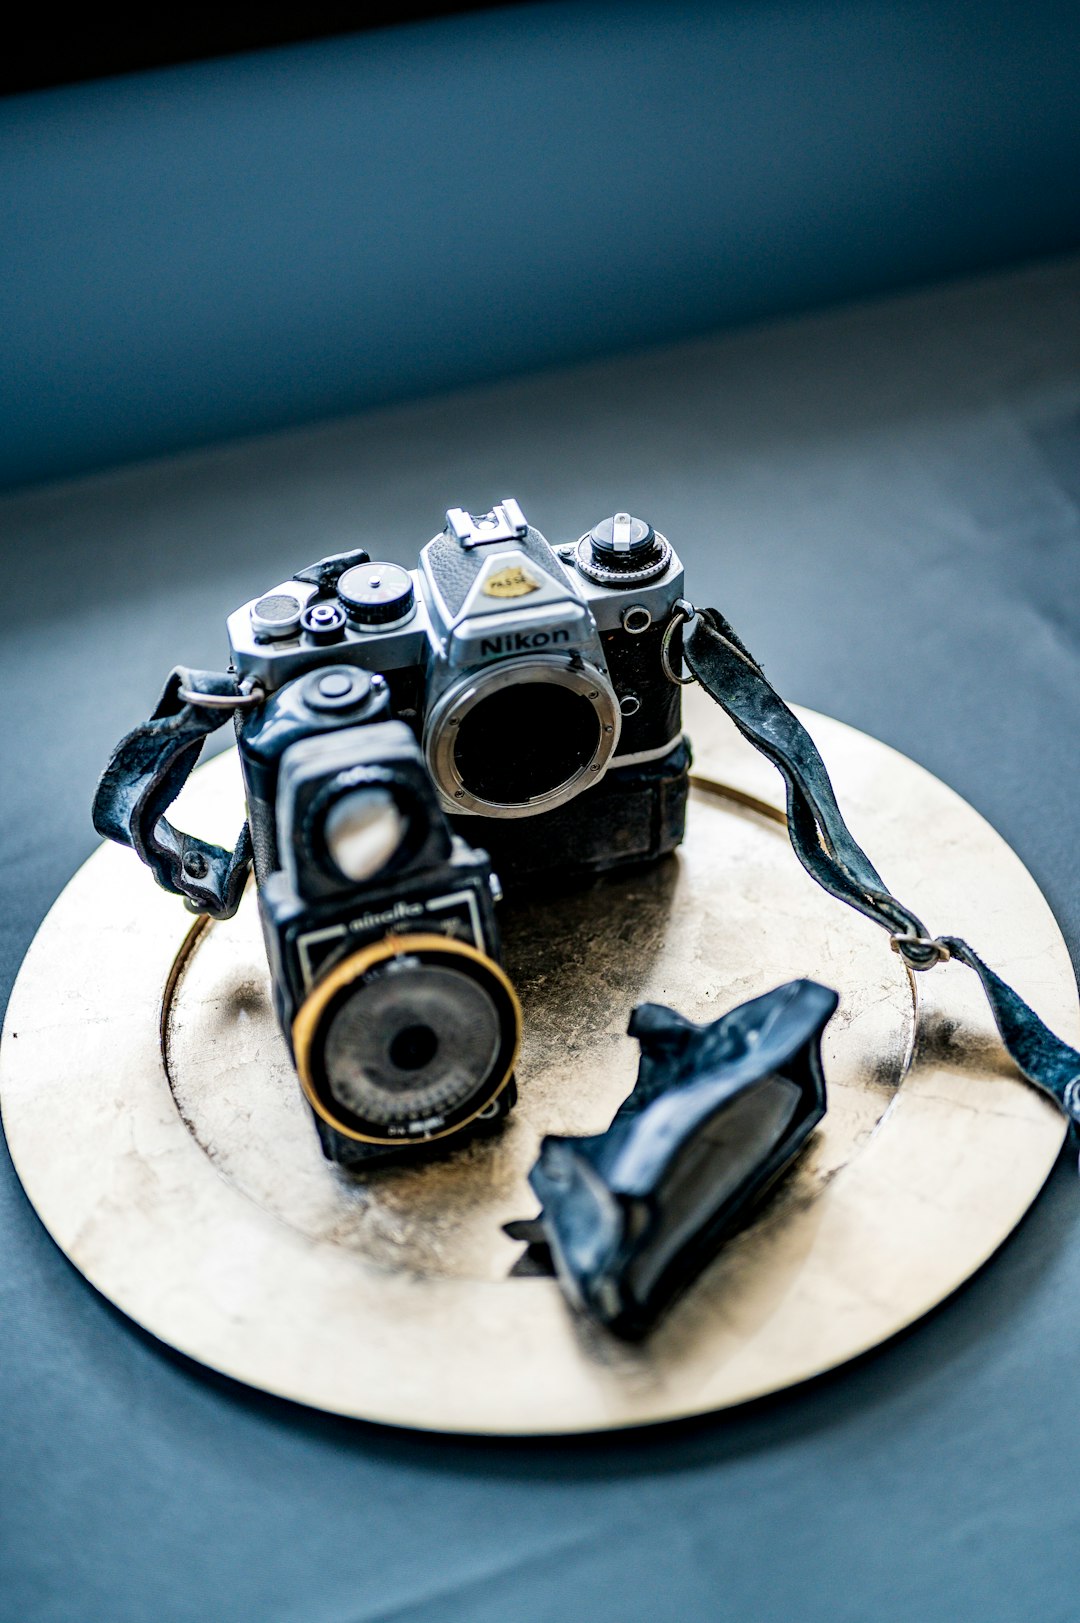 The Nikon camera belonging to Reid Blackburn, is donated to the Space Needle for their Time Capsule. This was the camera that Reid used prior to the his dead when the pyroclastic flow. Blackburn's car and body were found four days after the eruption. His camera, buried under the debris of the eruption, was found roughly one week later. It now sits inside the Time Capsule at the iconic Seattle outfit. 